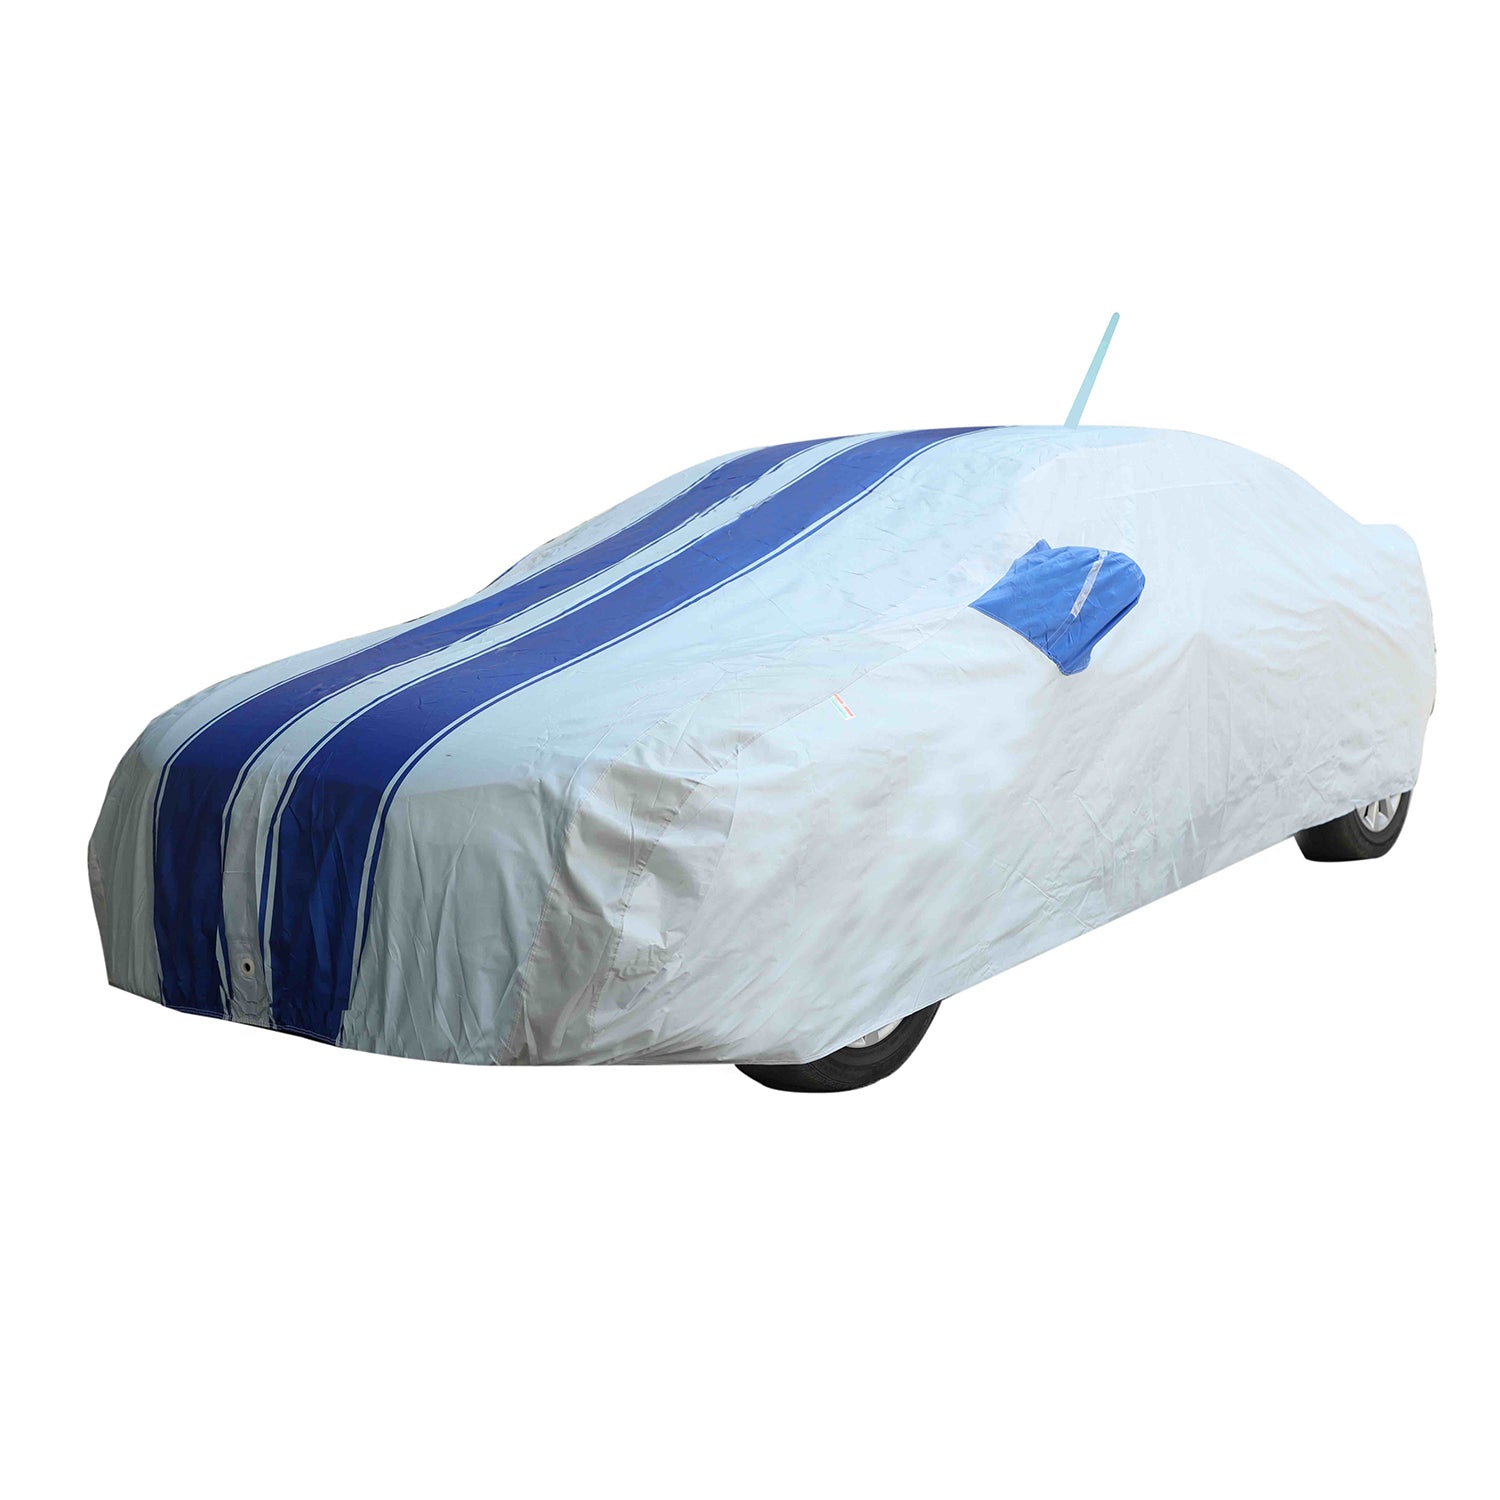 Buy Oshotto/Recaro Brown 100% Waterproof Car Body Cover with